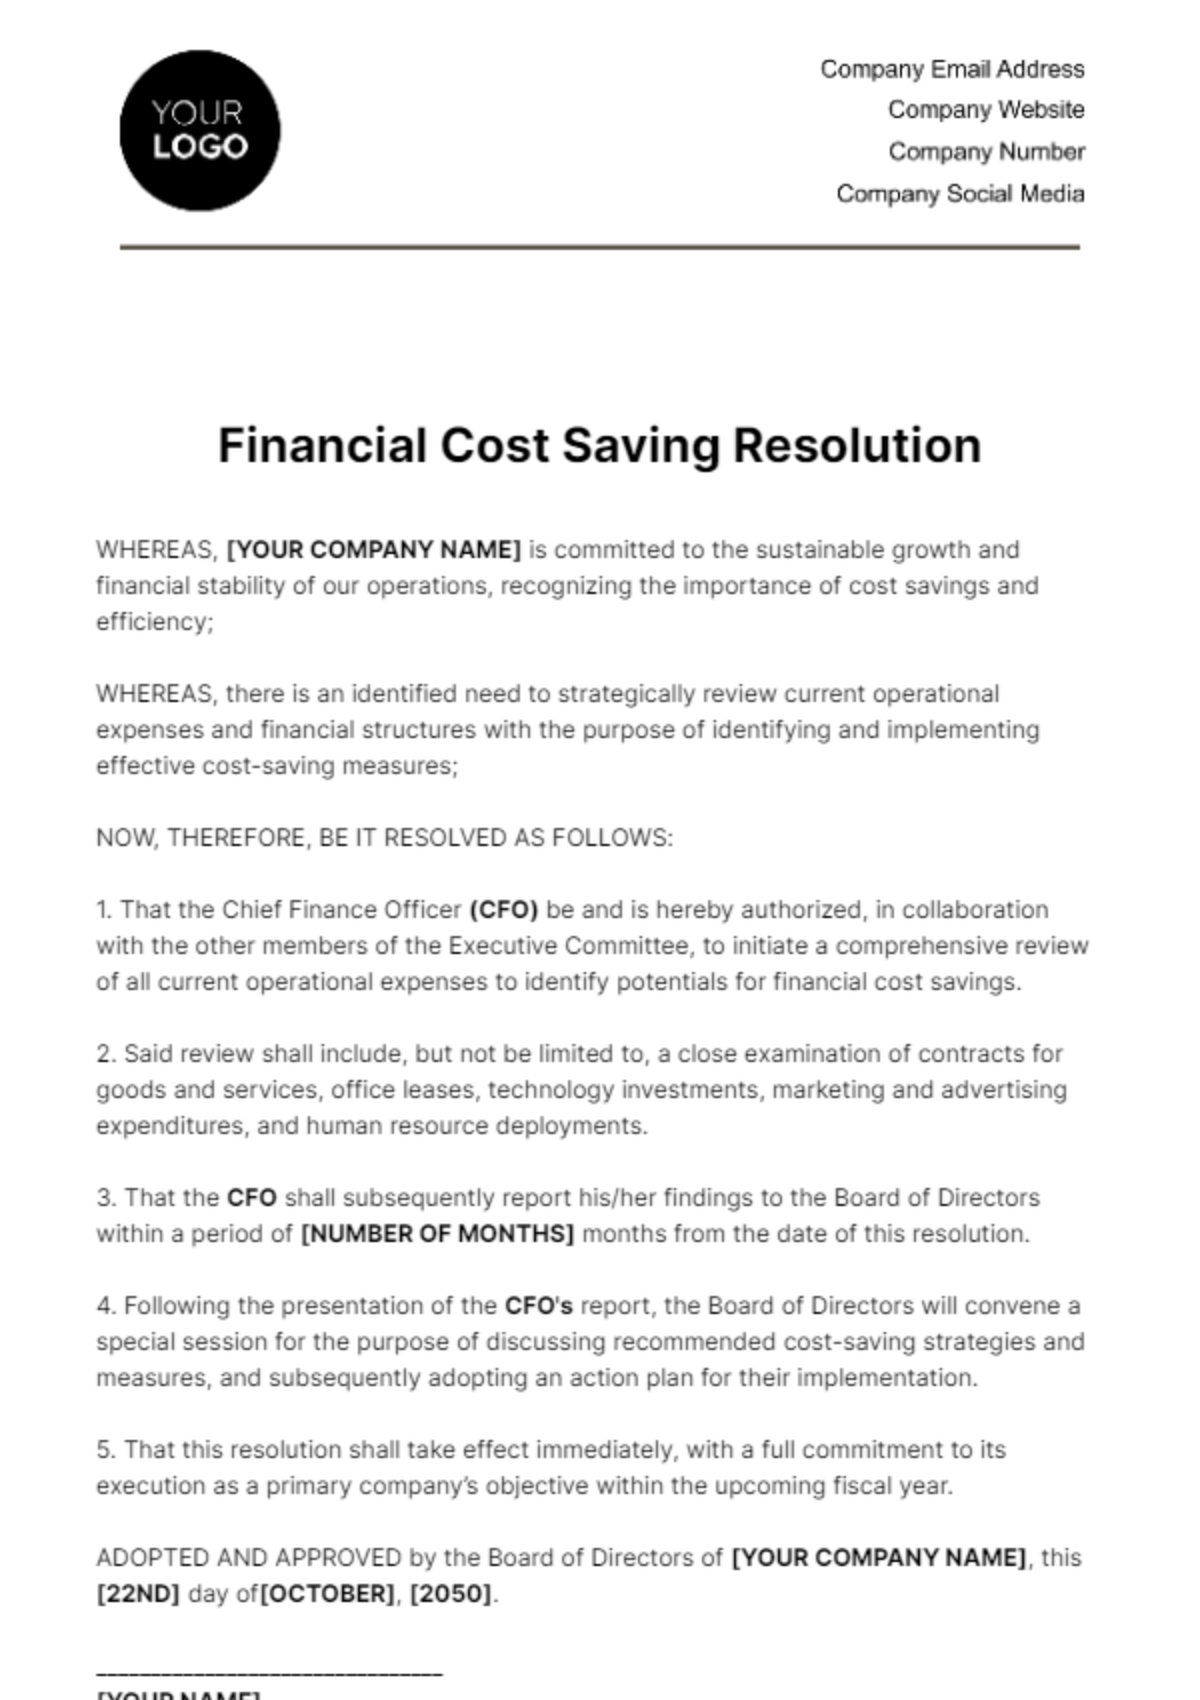 Free Financial Cost Saving Resolution Template